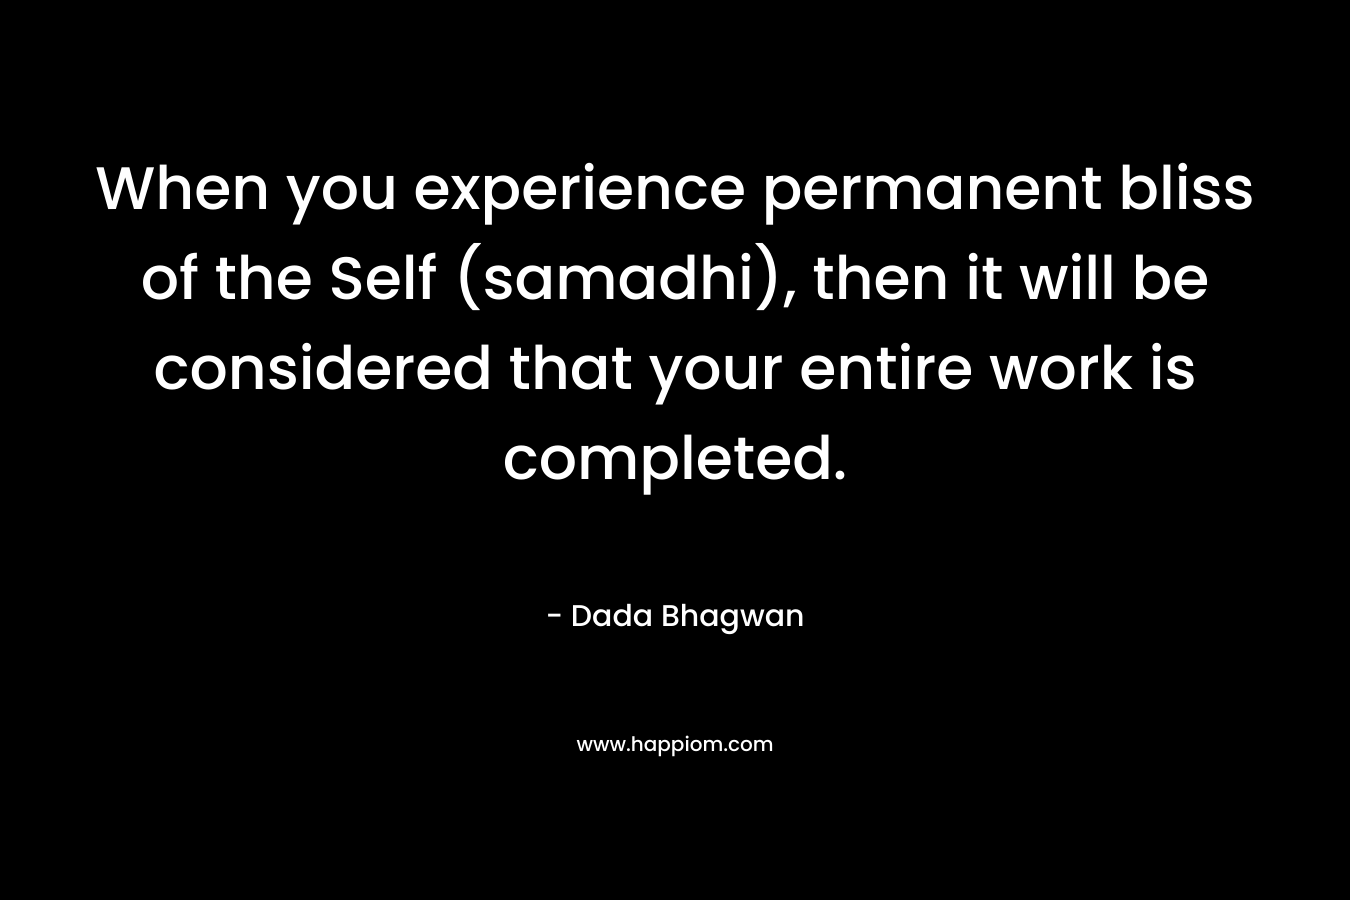 When you experience permanent bliss of the Self (samadhi), then it will be considered that your entire work is completed. – Dada Bhagwan